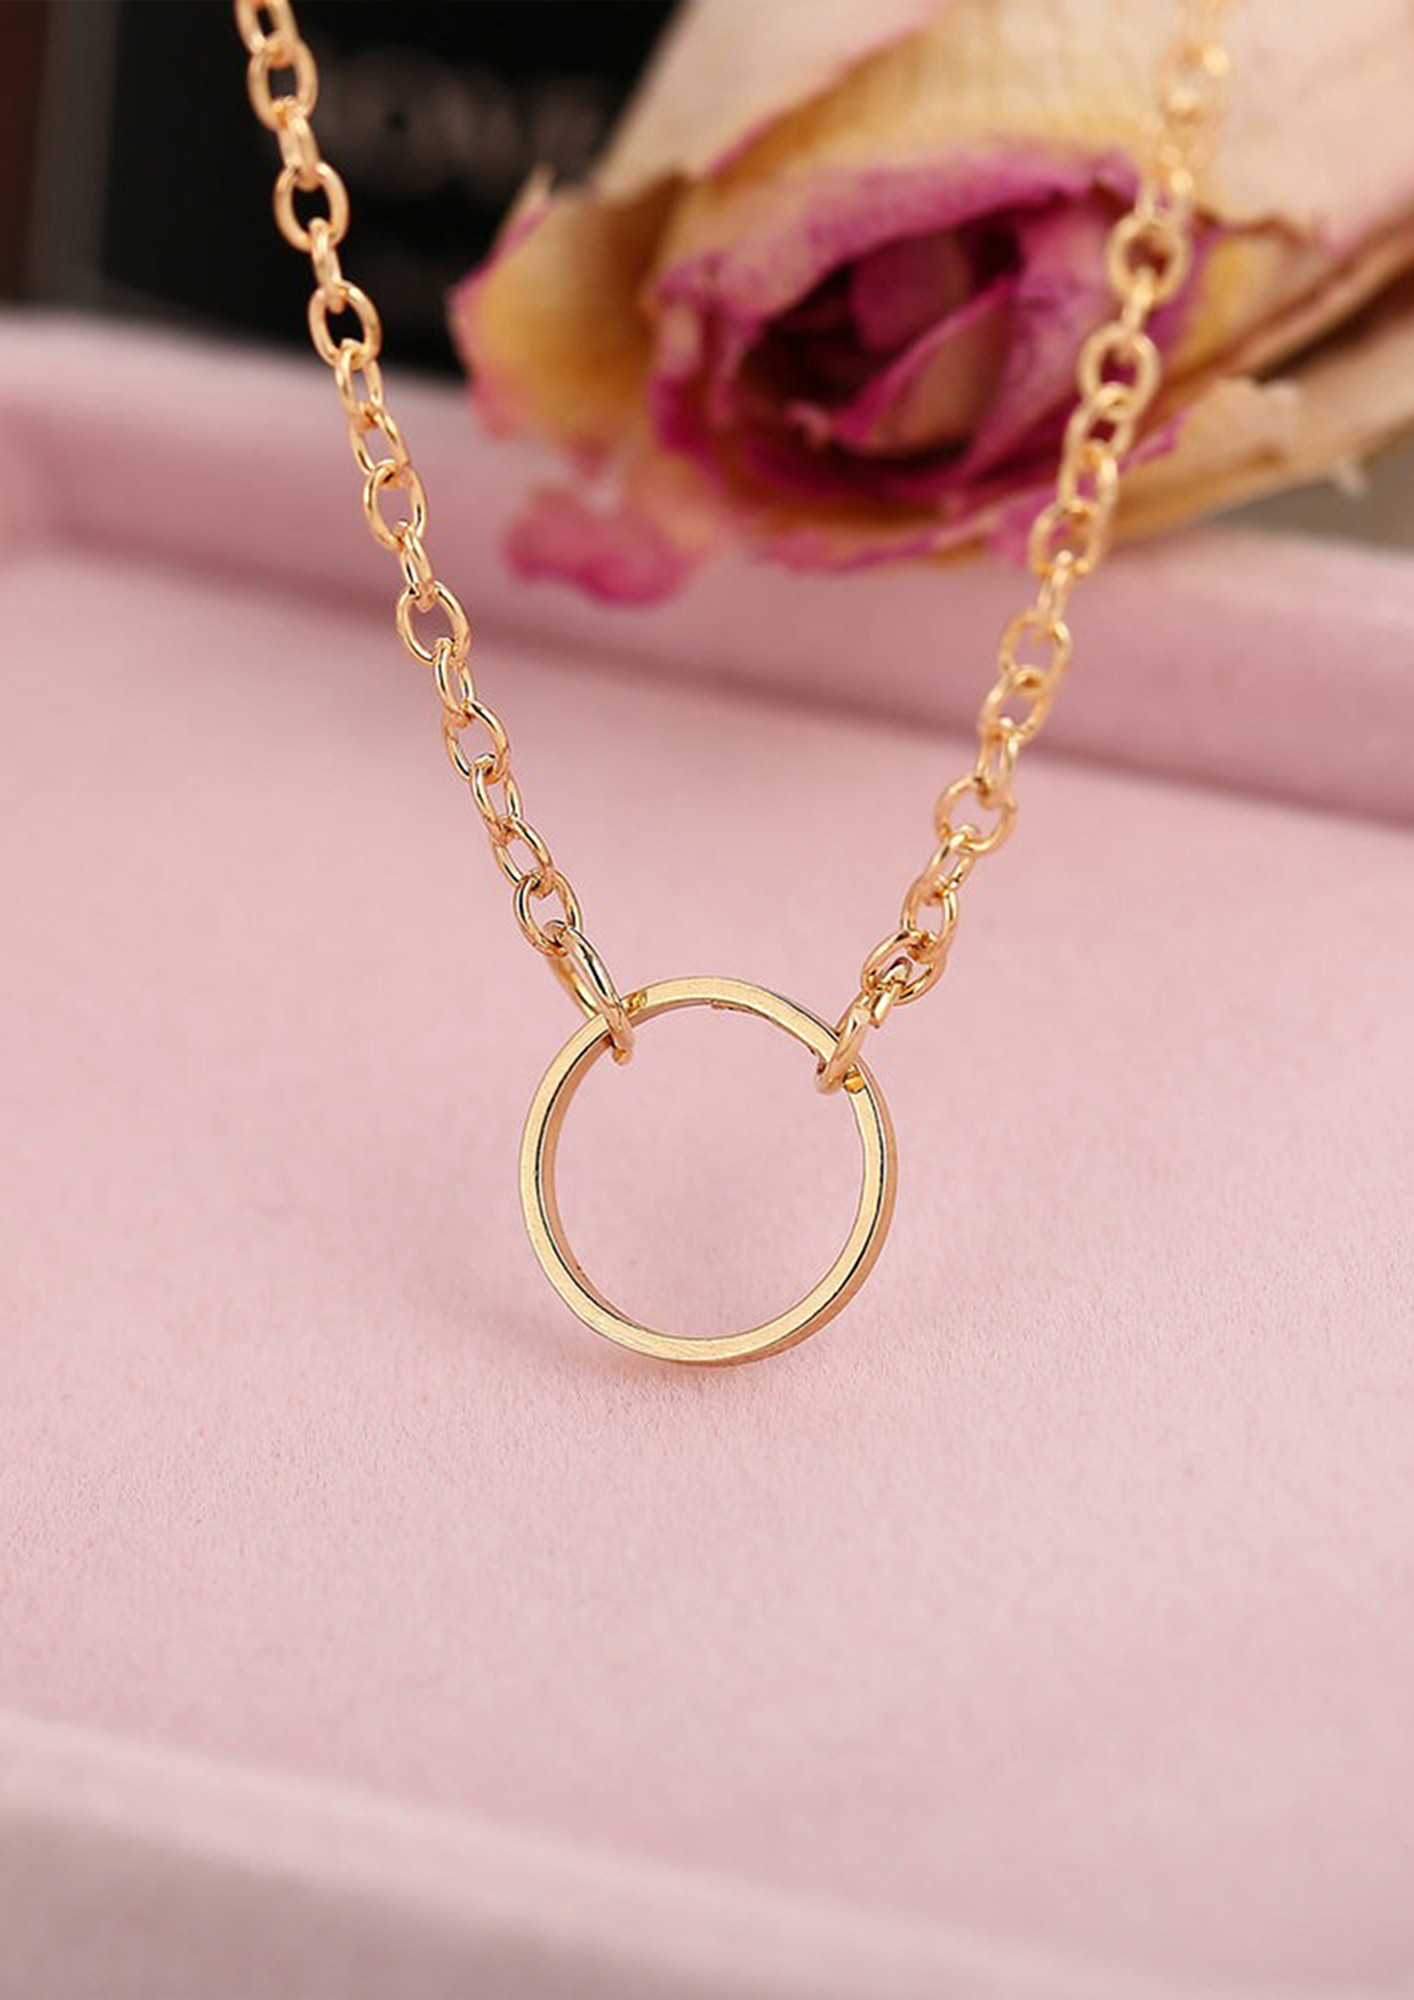 Ring Pendant With Chain